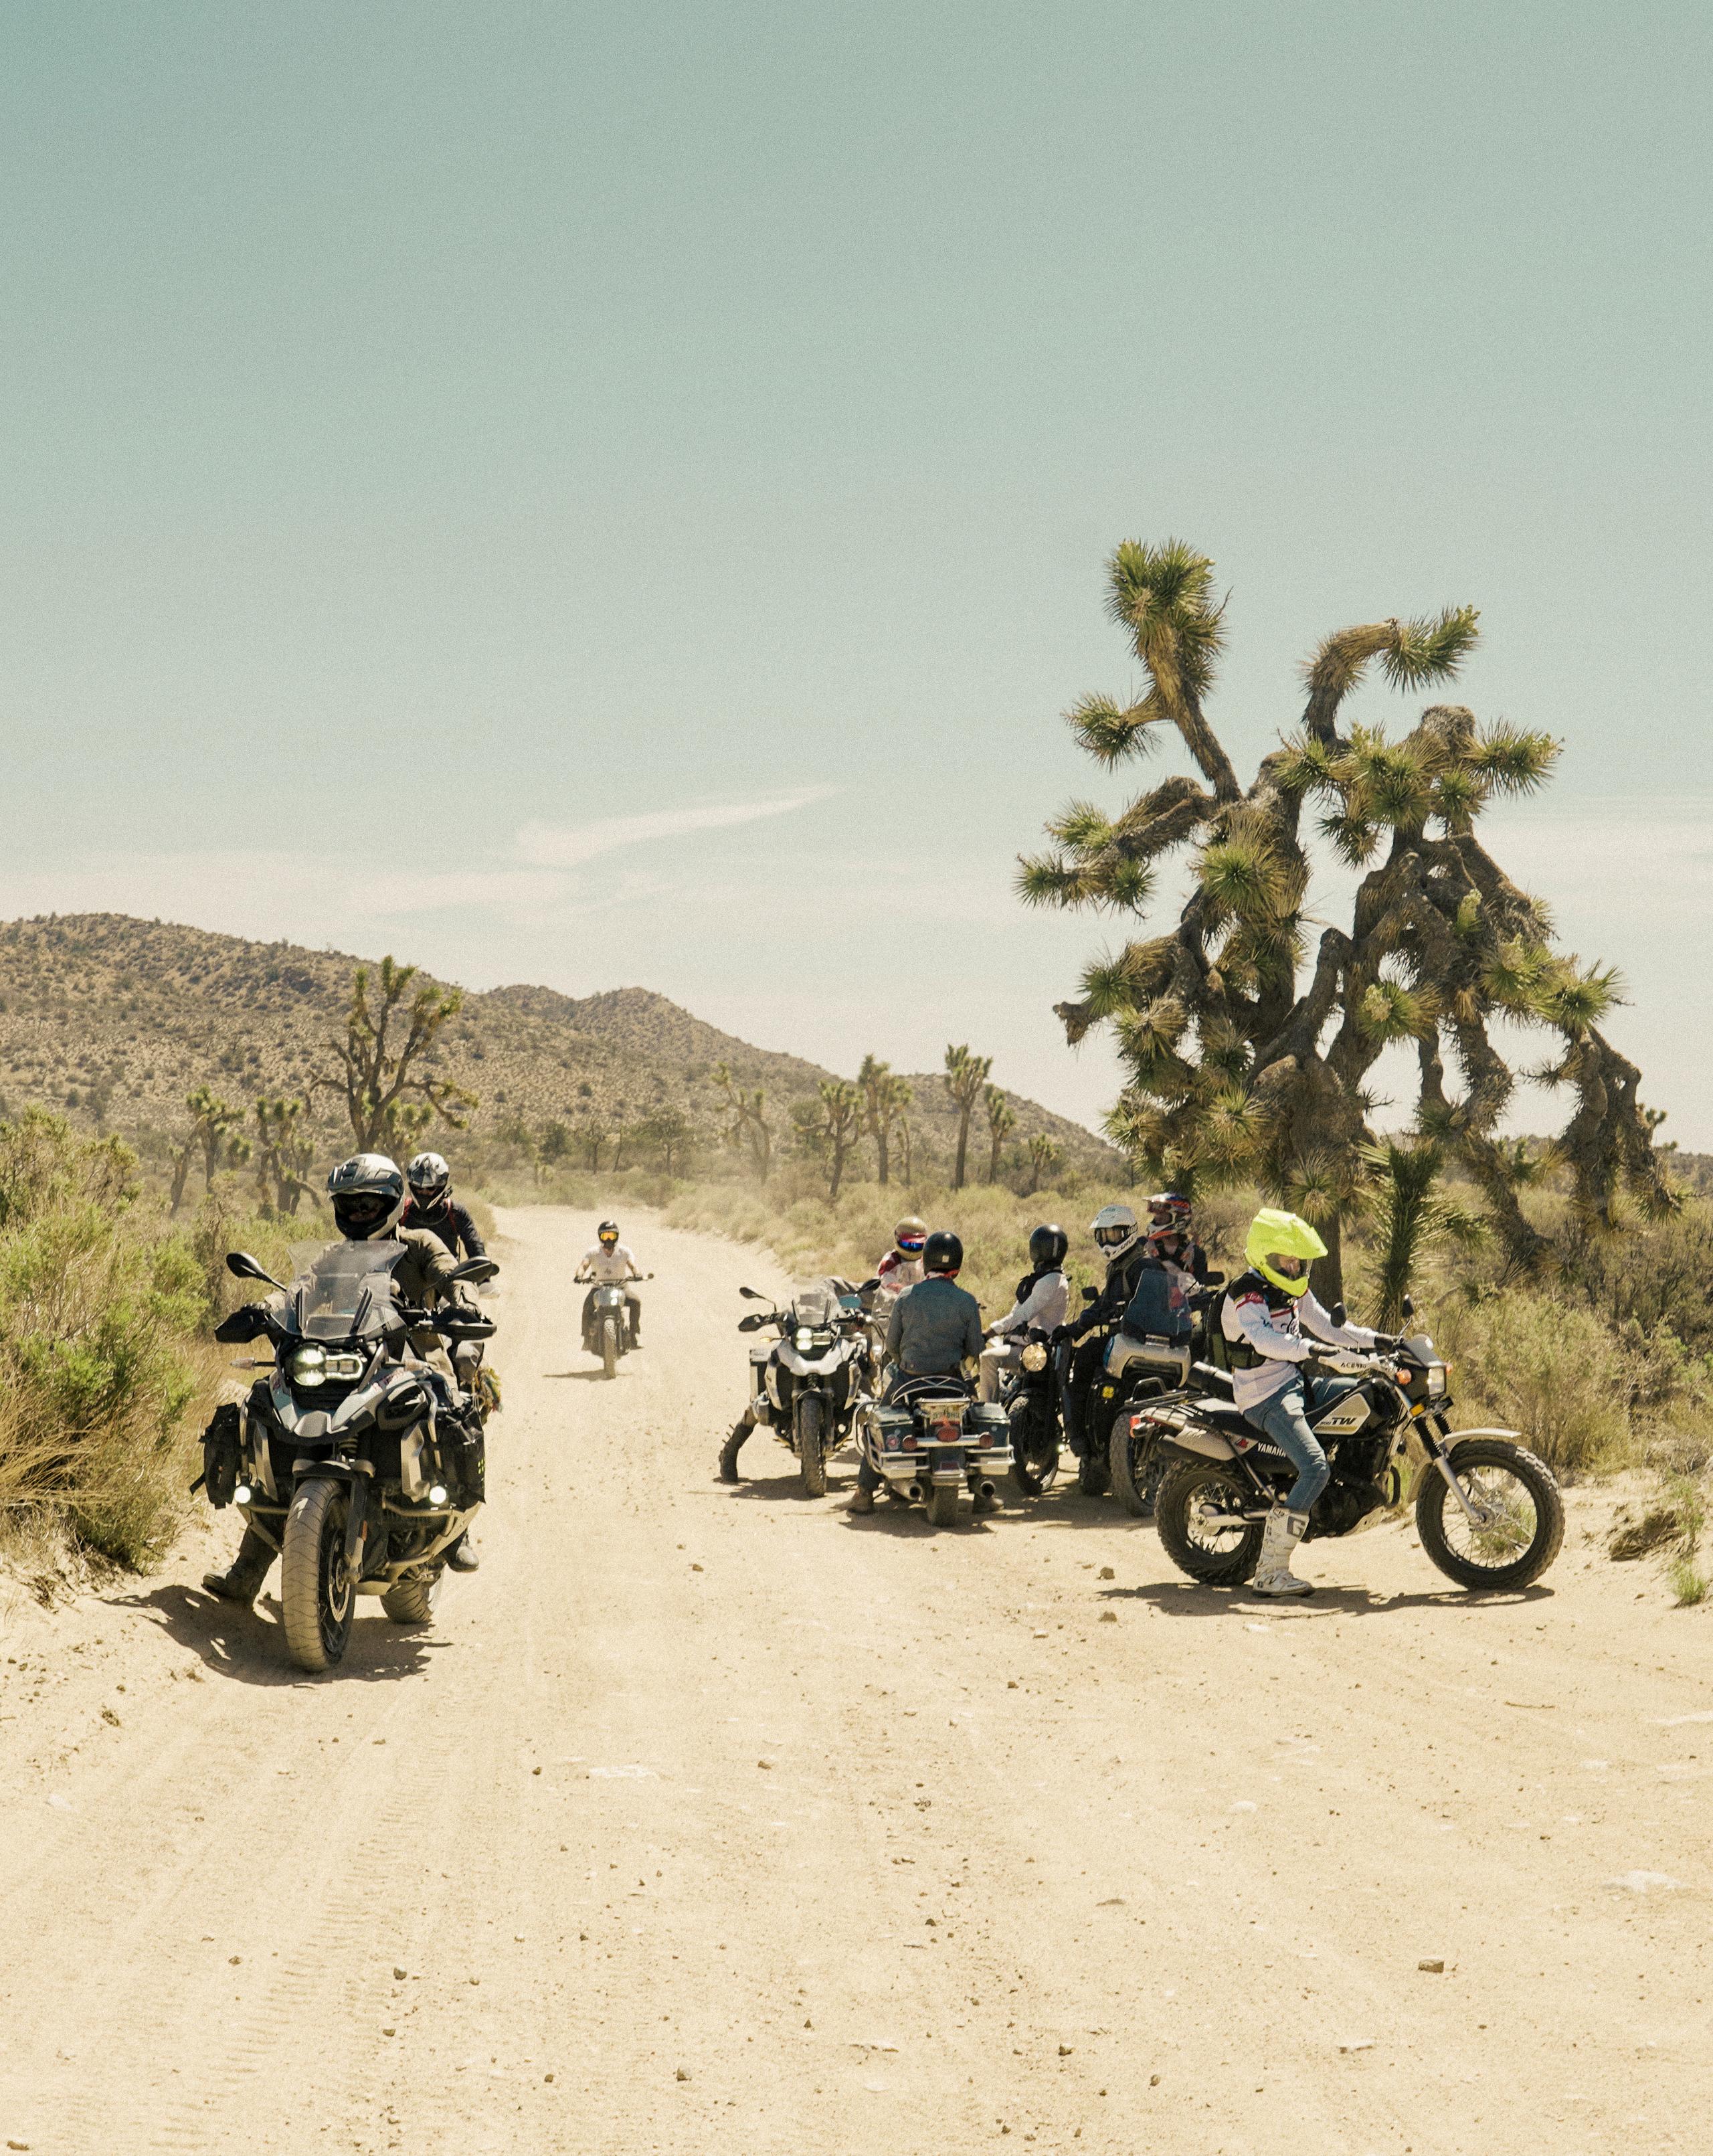 Group of motorcyclists on dirt road in Joshua Tree